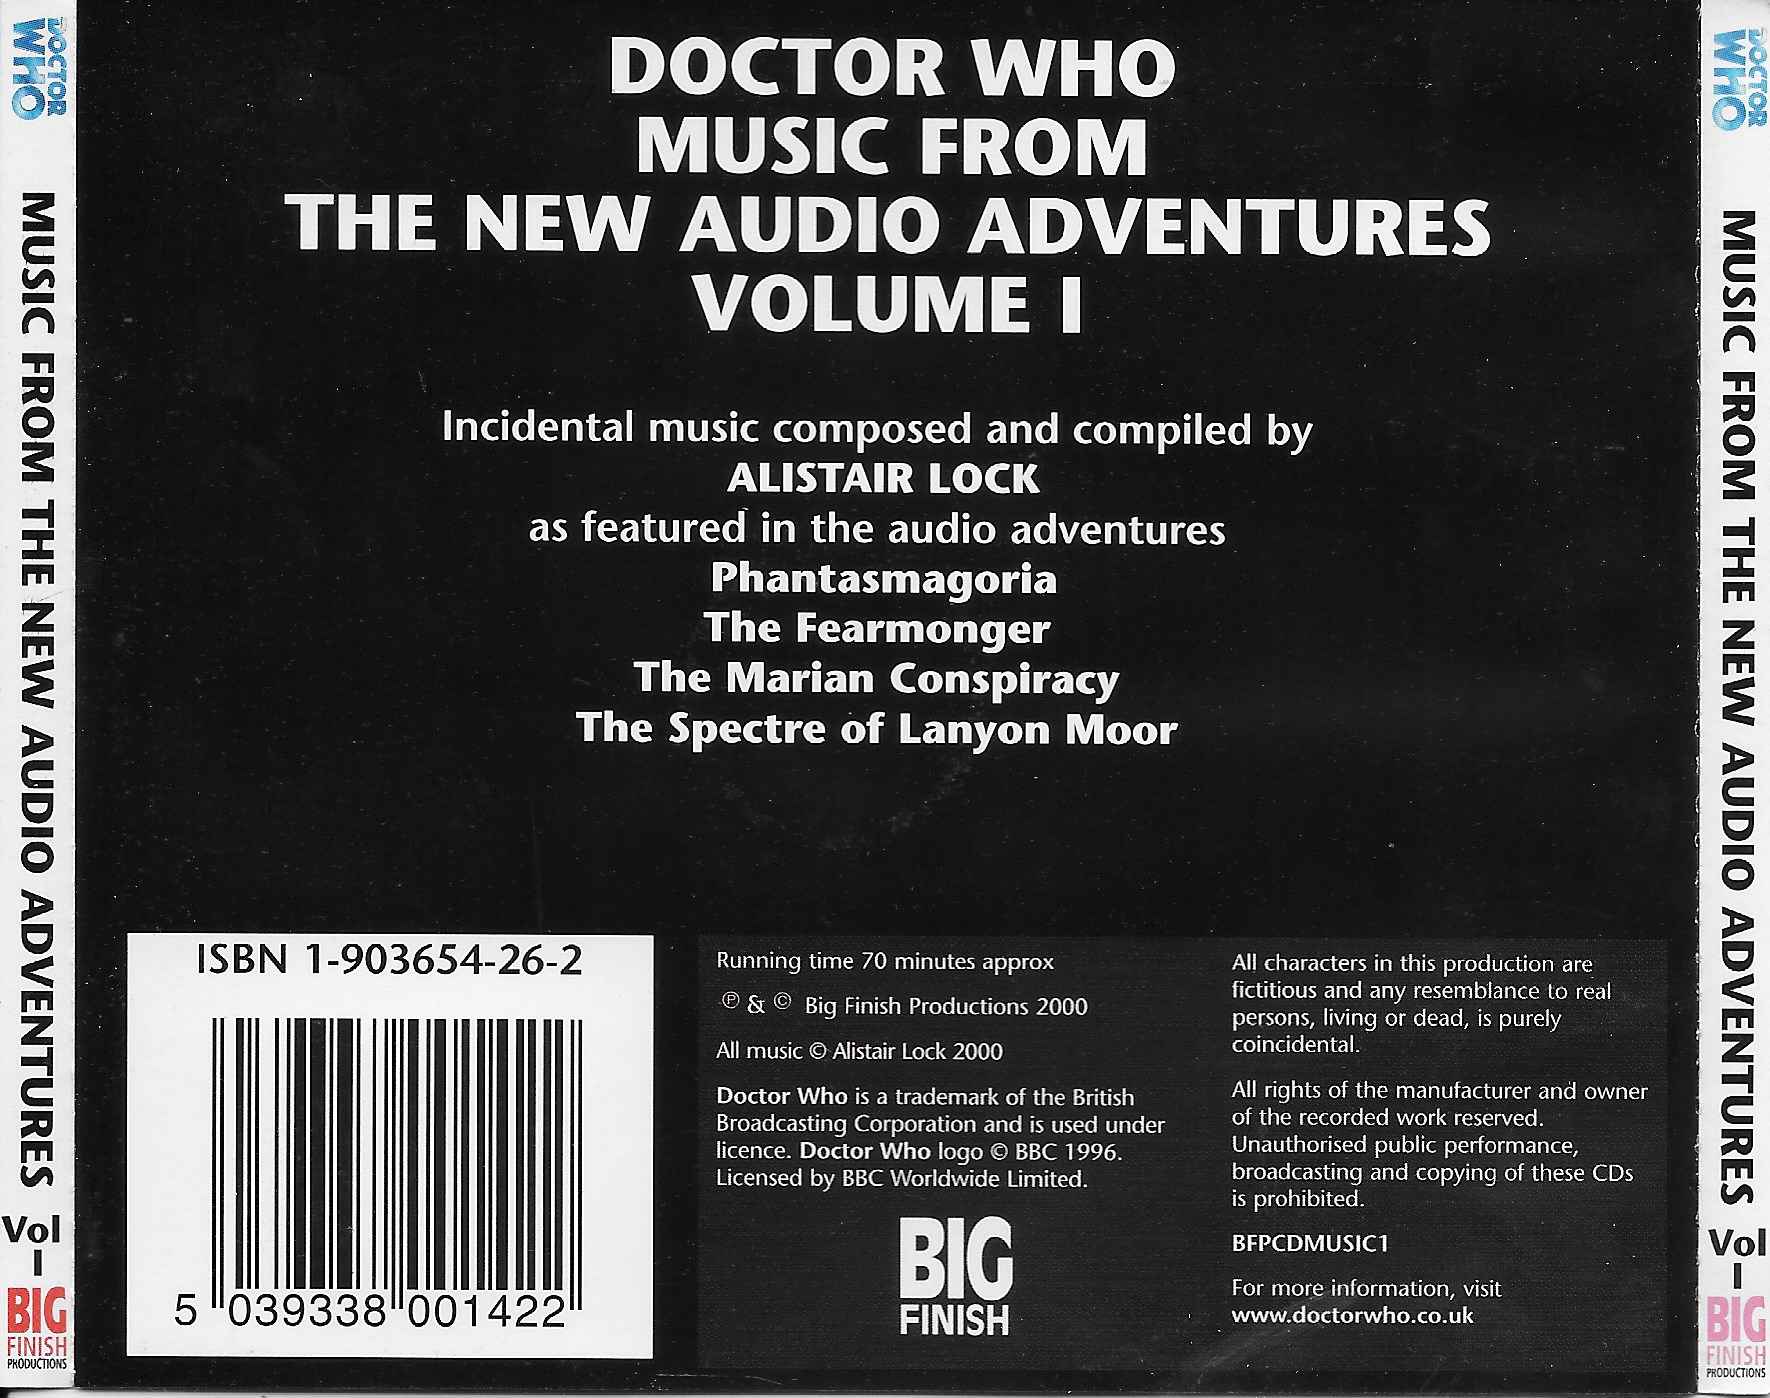 Picture of BFPCDMUSIC 1 Doctor Who - Music from the new adventures - Volume 1 by artist Alistair Lock from the BBC records and Tapes library